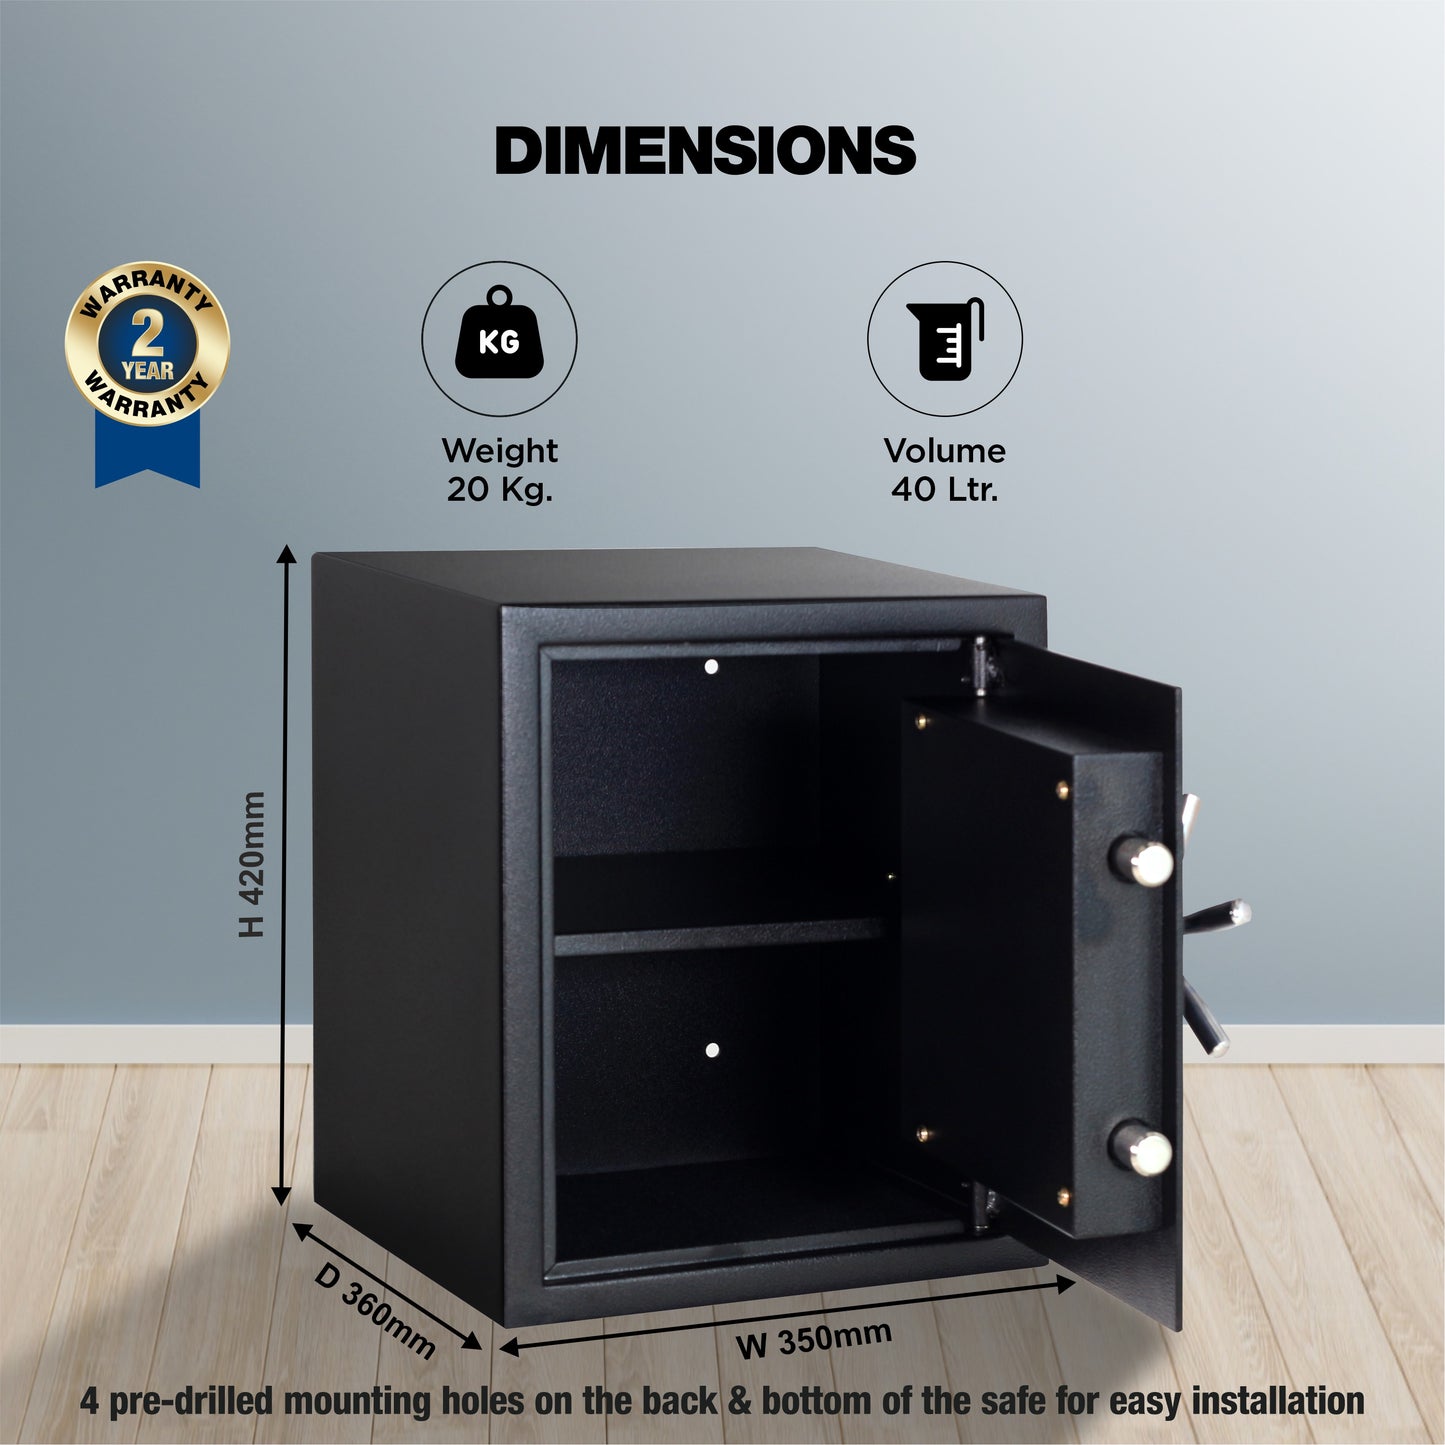 Ozone Mechanical Safe for Homes, Offices & Warehouses | High-security Mechanical Key (40 Ltrs.)